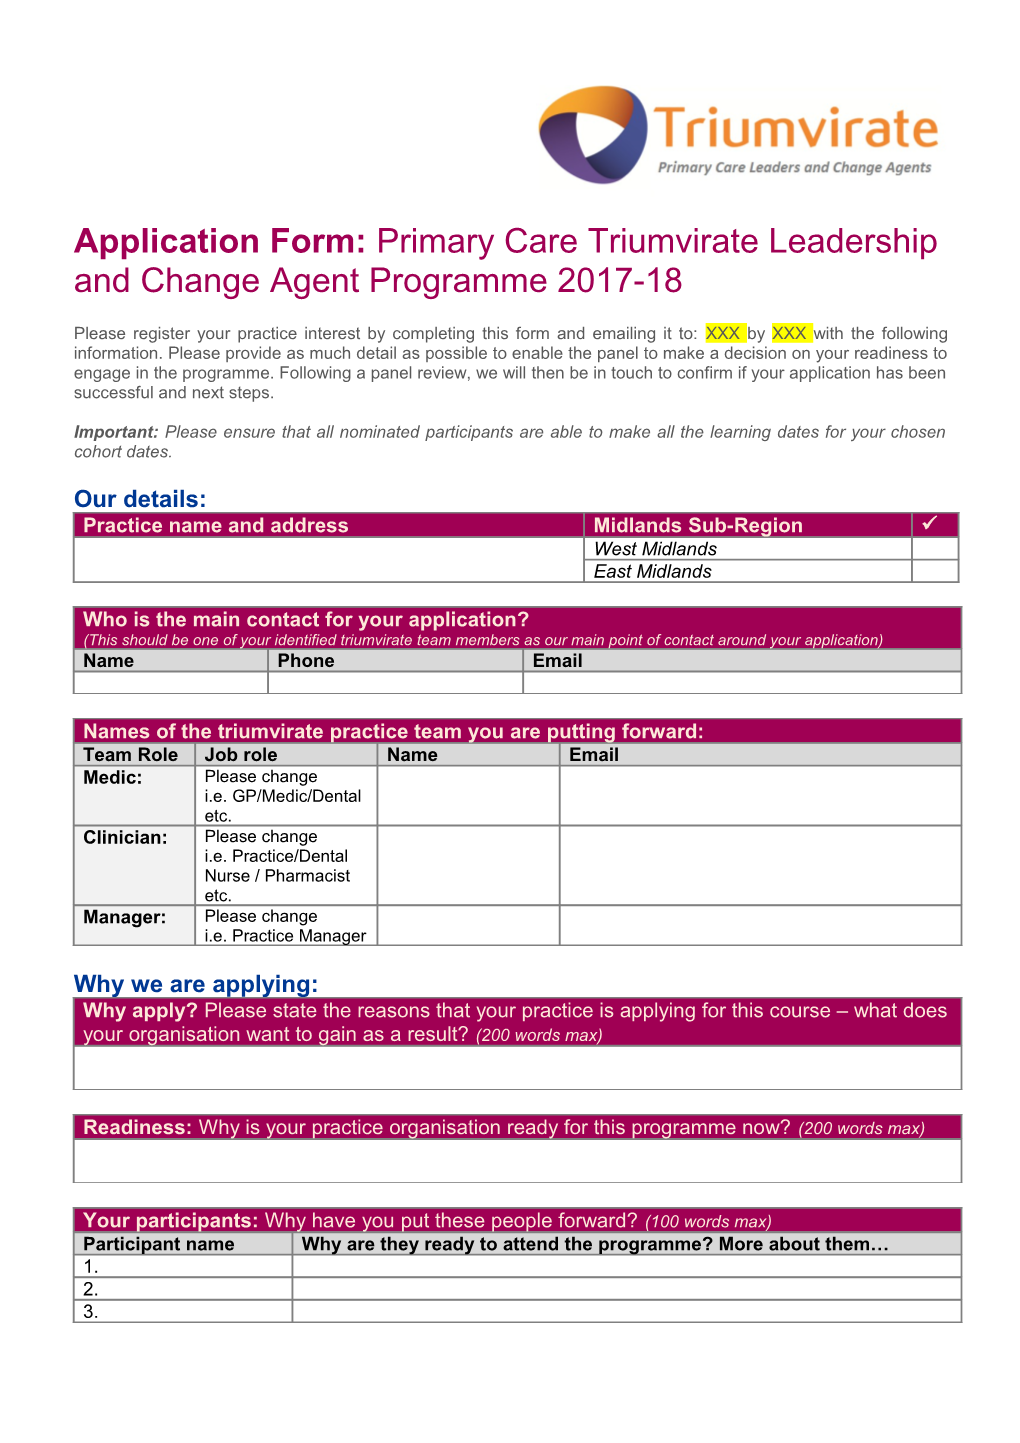 Application Form: Primary Care Triumvirate Leadership and Change Agent Programme 2017-18